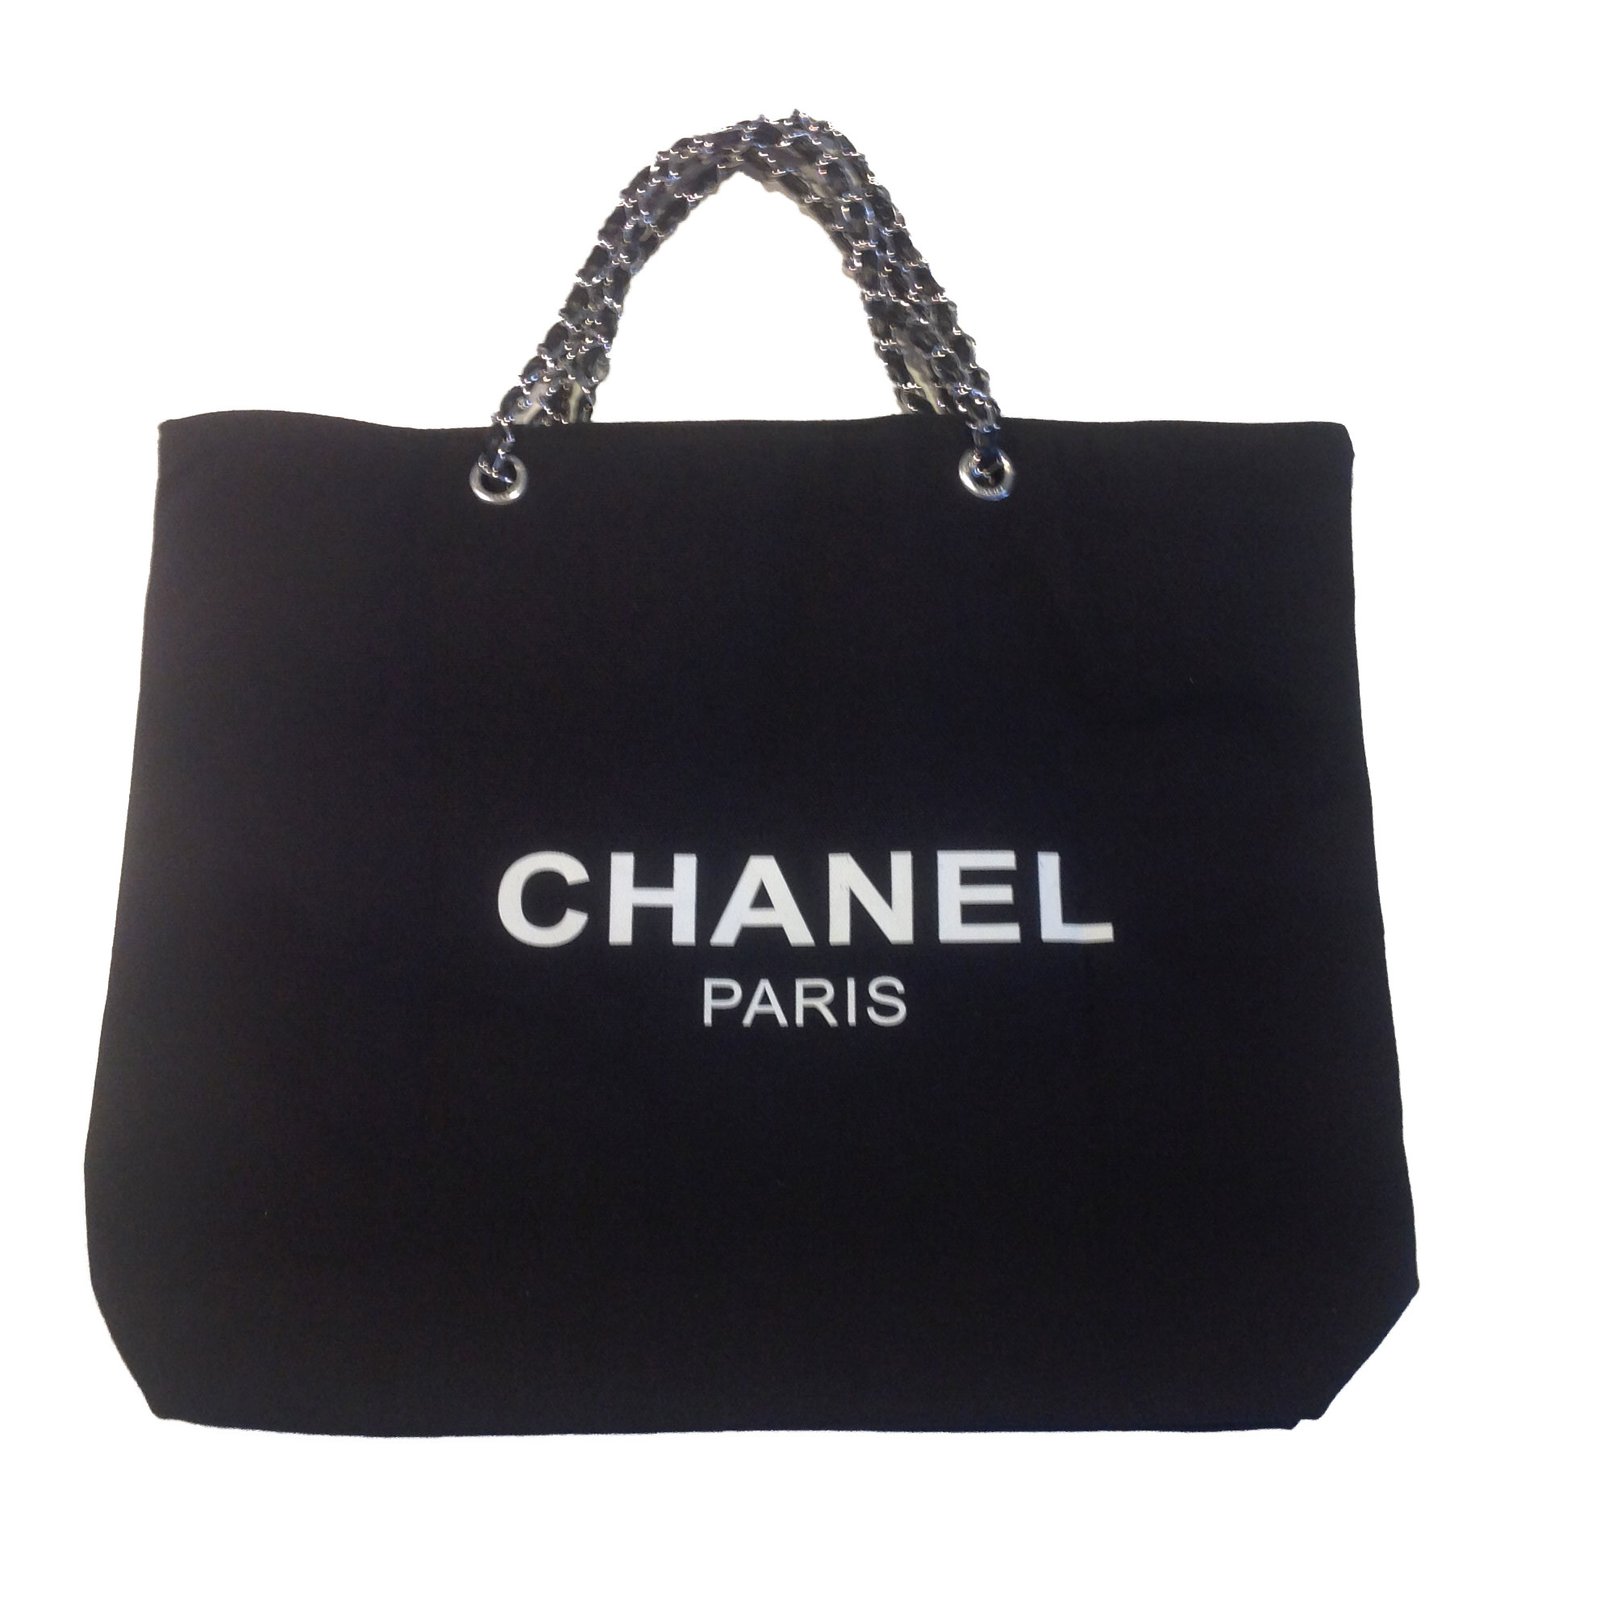 Chanel Vip Gift Bag / Chanel VIP Gift Beaute Large Clear Tote Bag ...